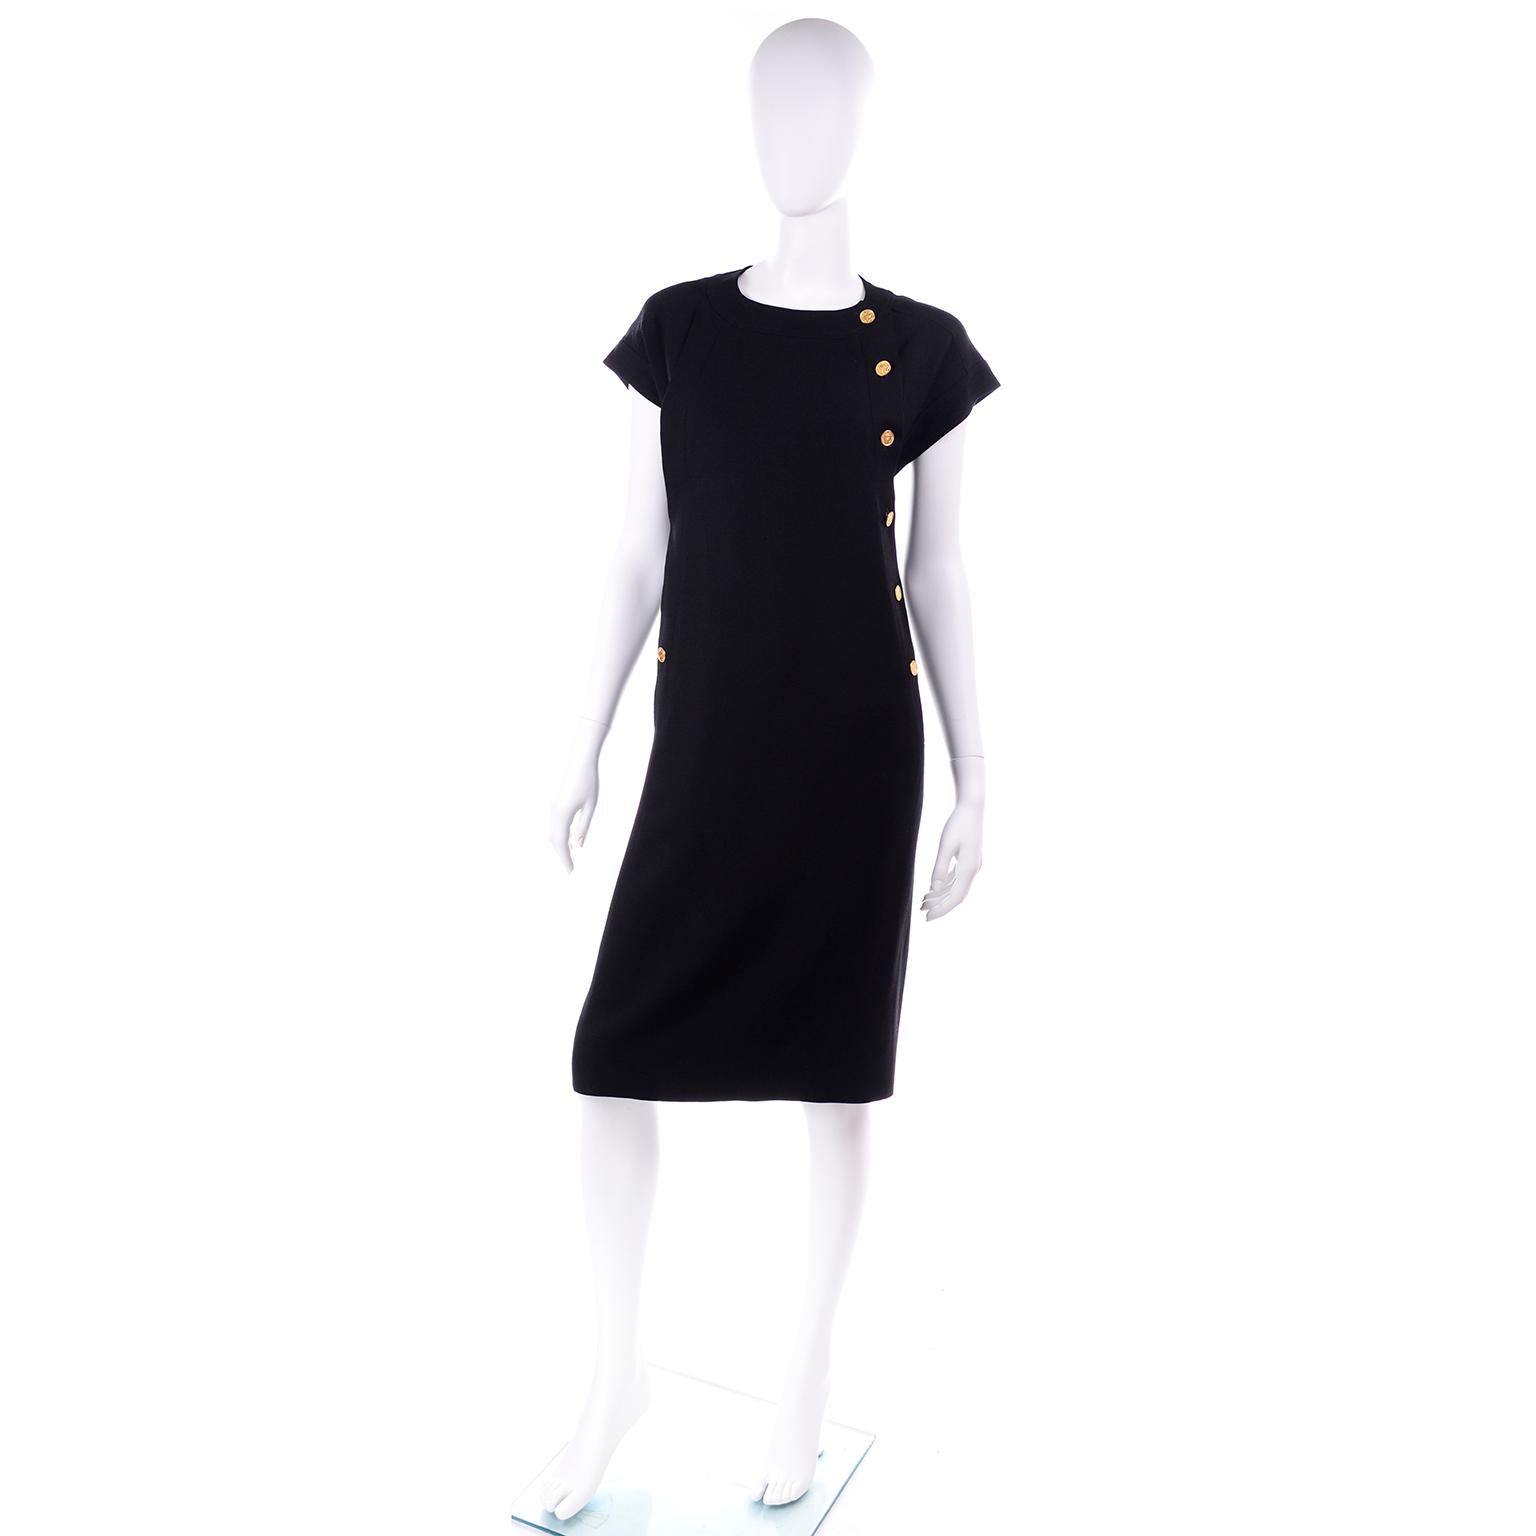 This is a great black linen dress purchased at Garfinckel's in the 1980's.  This shift style dress has cap sleeves and  the black Chanel Boutique Paris label and is marked a French size 40. Fits like a Medium or a size 8. The black fabric is 100%